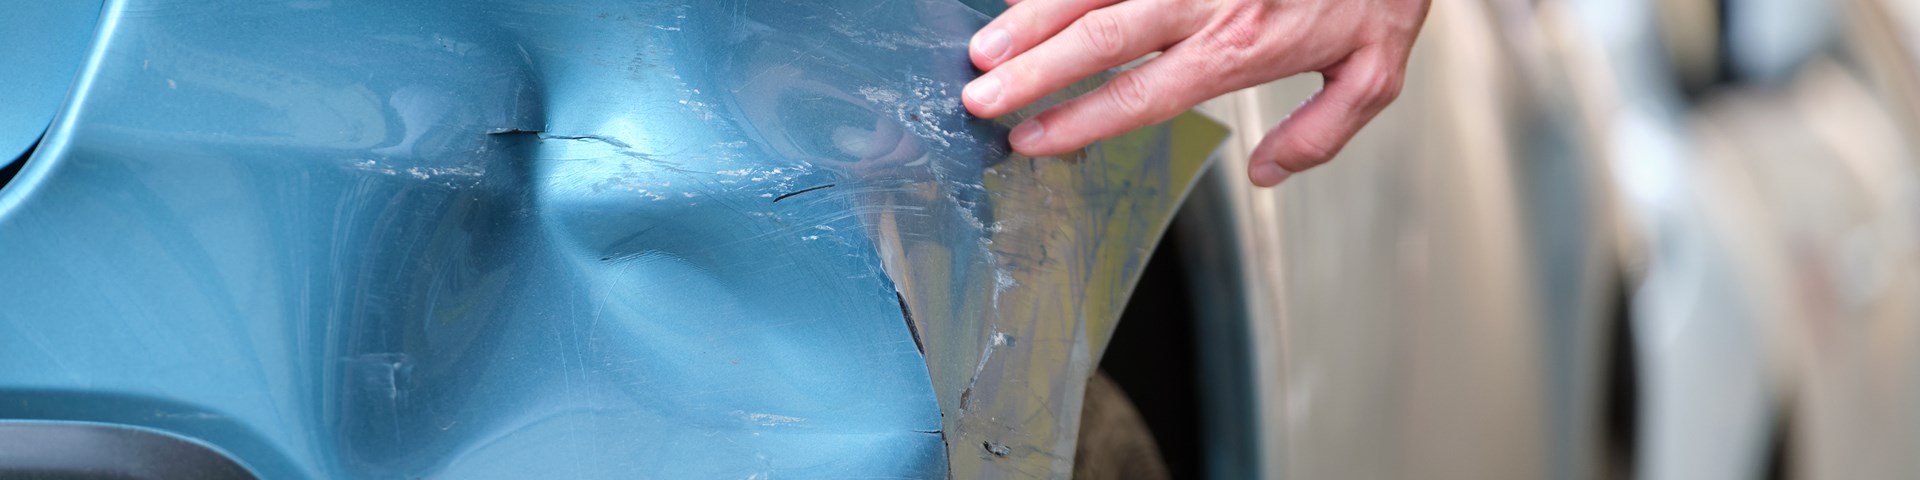 Person running their hand across dent made on car